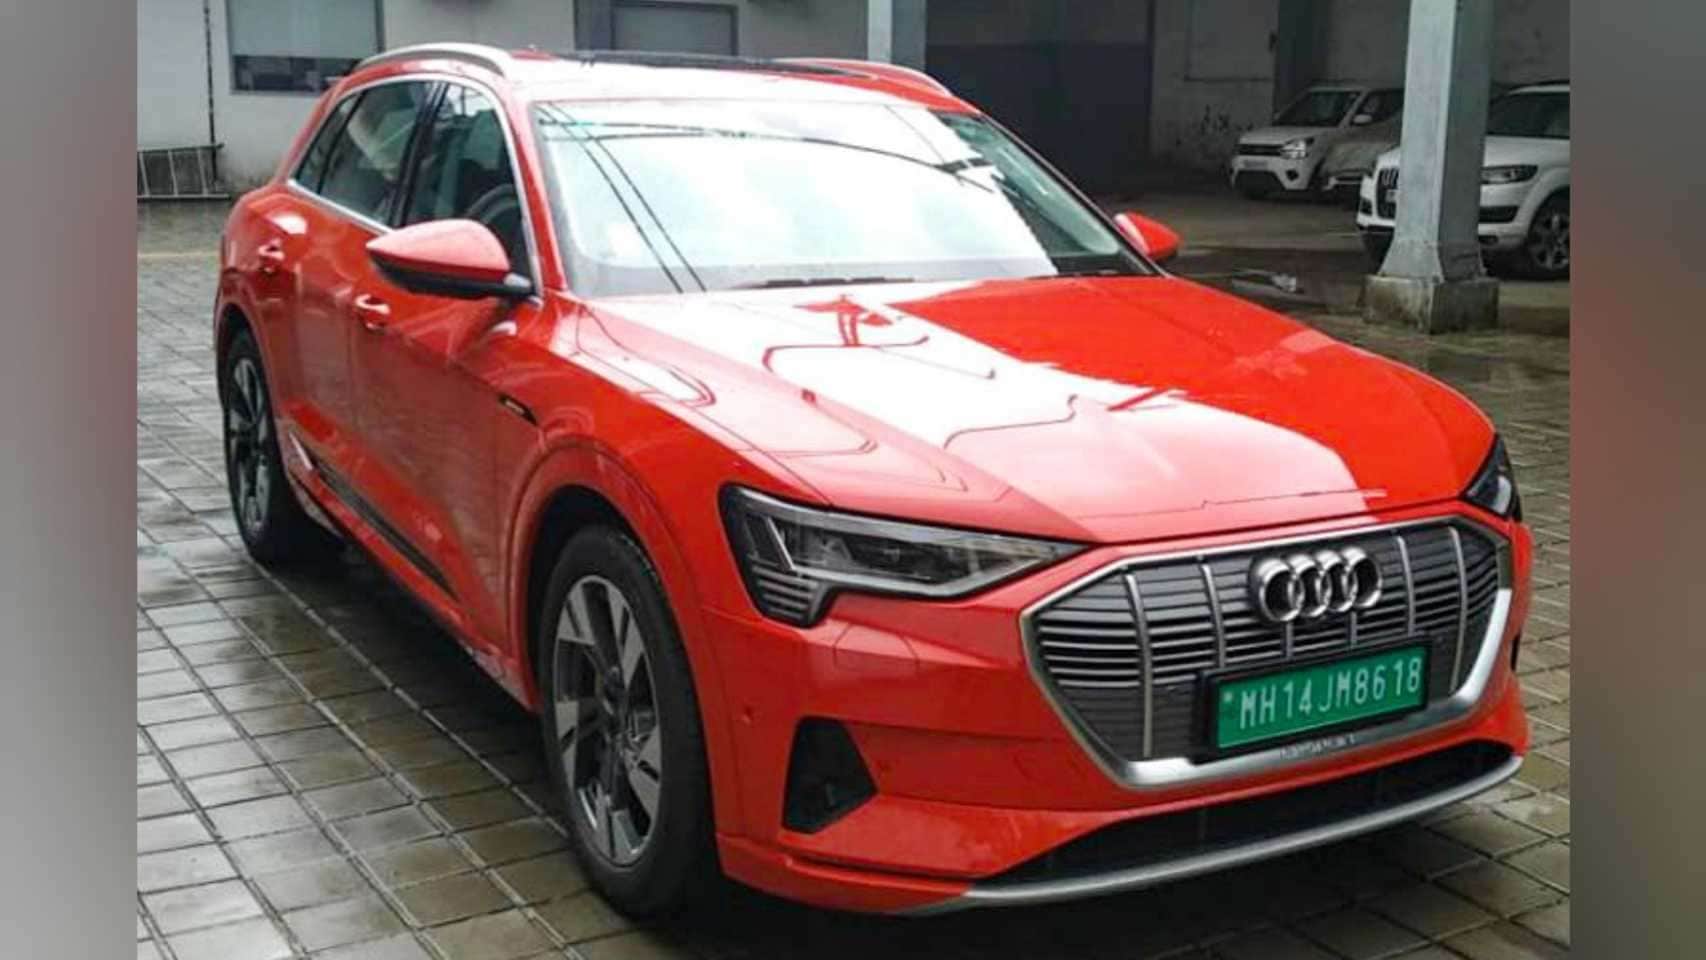 The Audi e-tron is expected to have a range of over 400 kilometres on a full charge. Image: Audi India